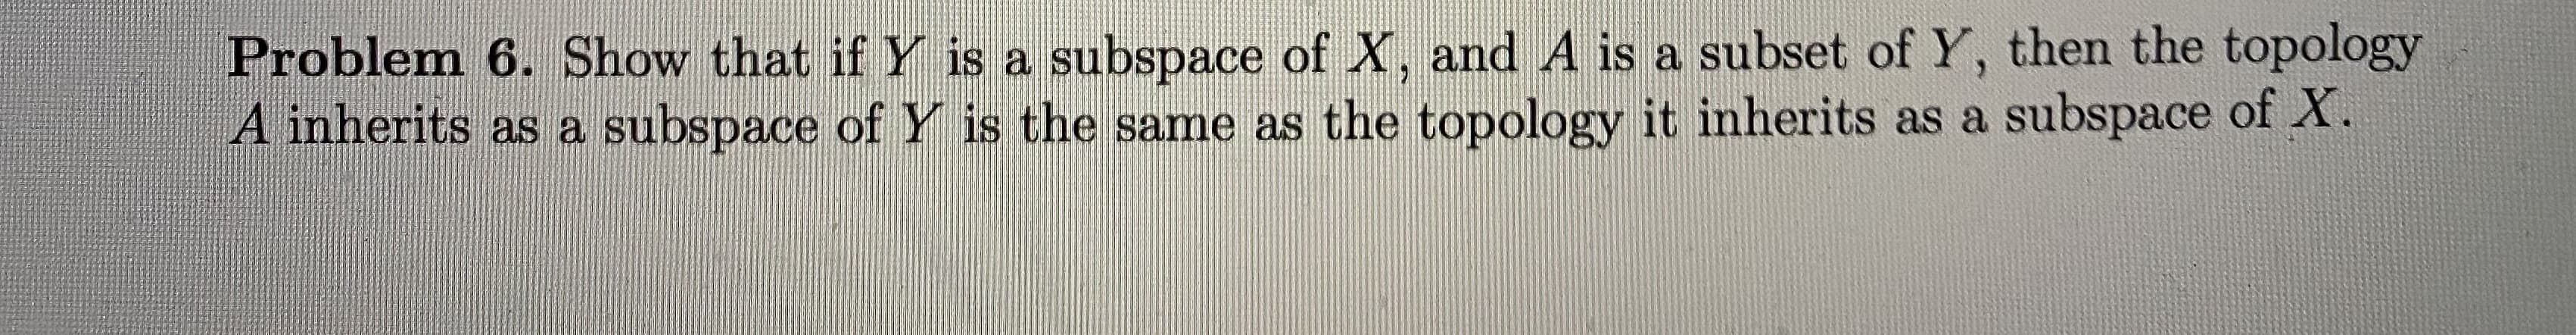 Show that ifY is a subspace of X, and A is a subset of Y, then the topology
a subspace of Y is the same as the topology it inherits as a subspace of X.
